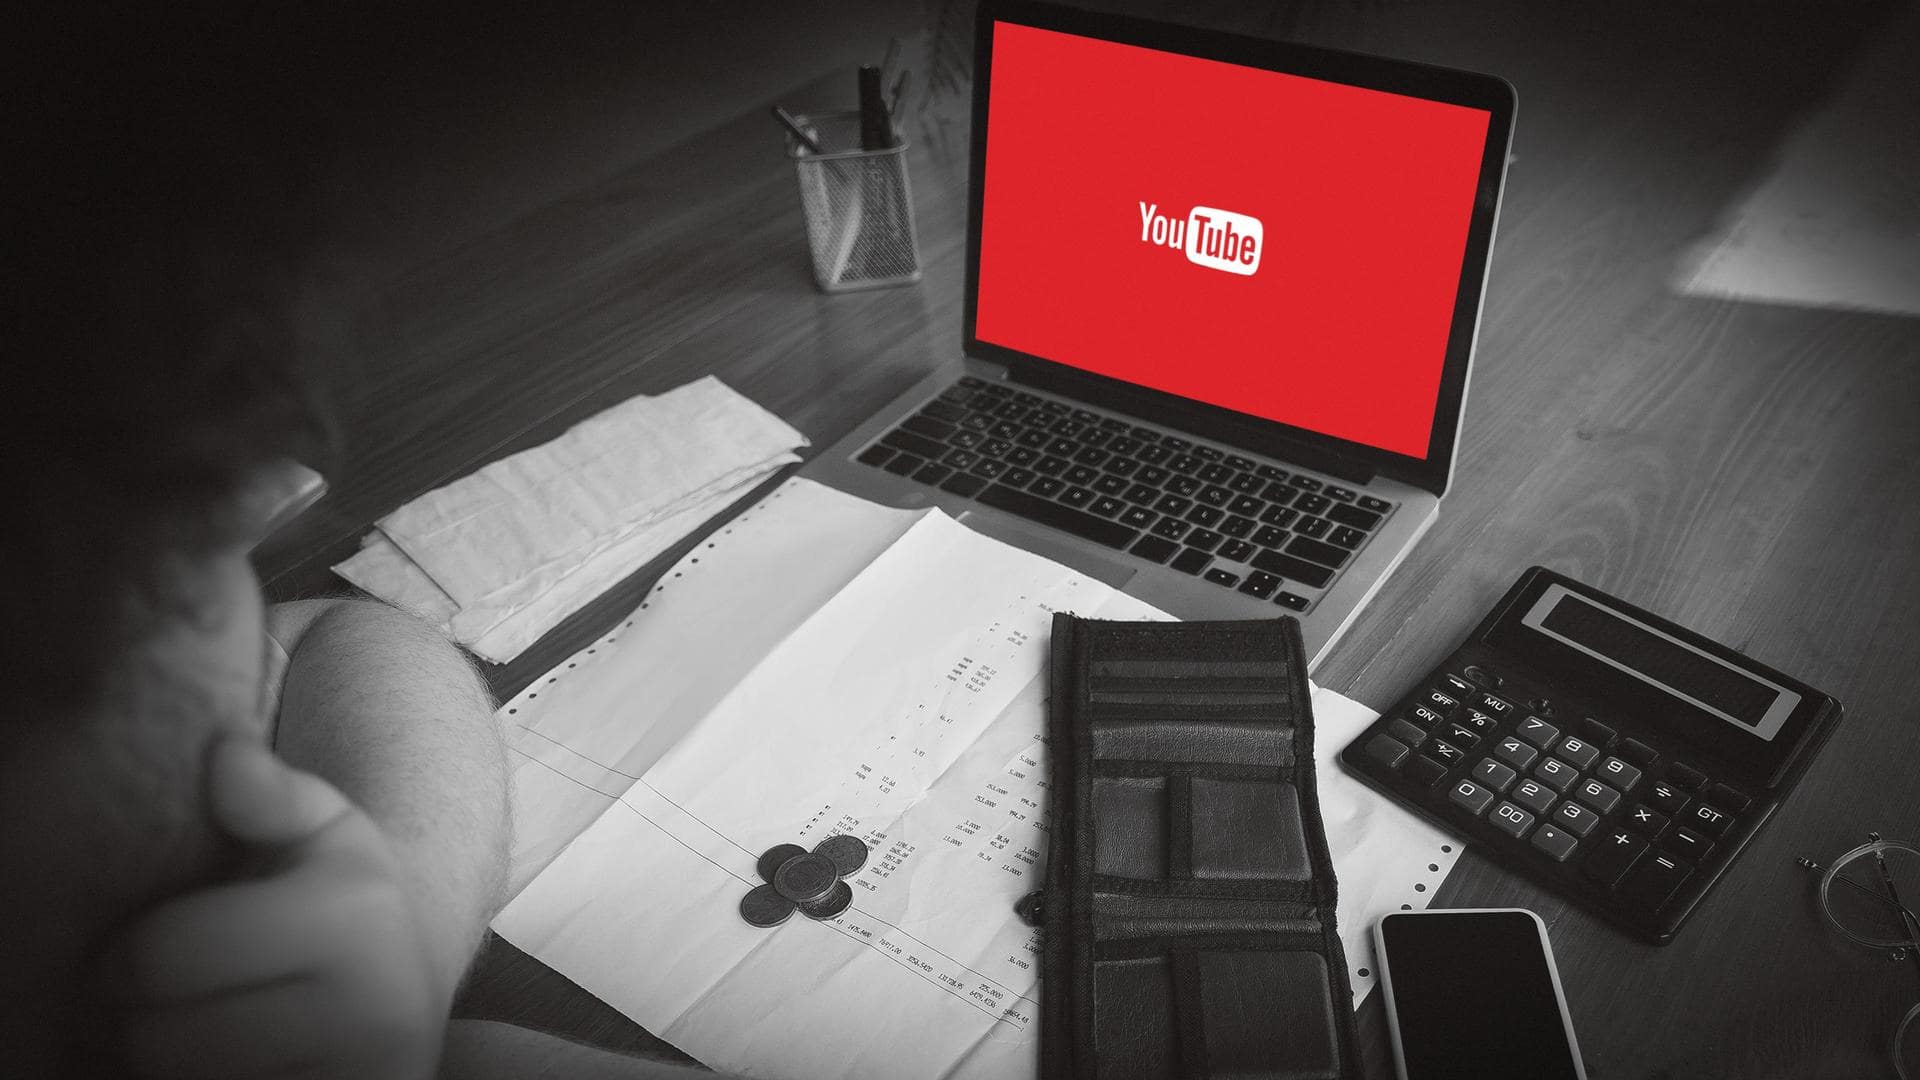 Preparing for Class-12 accountancy? Follow these 5 YouTube channels